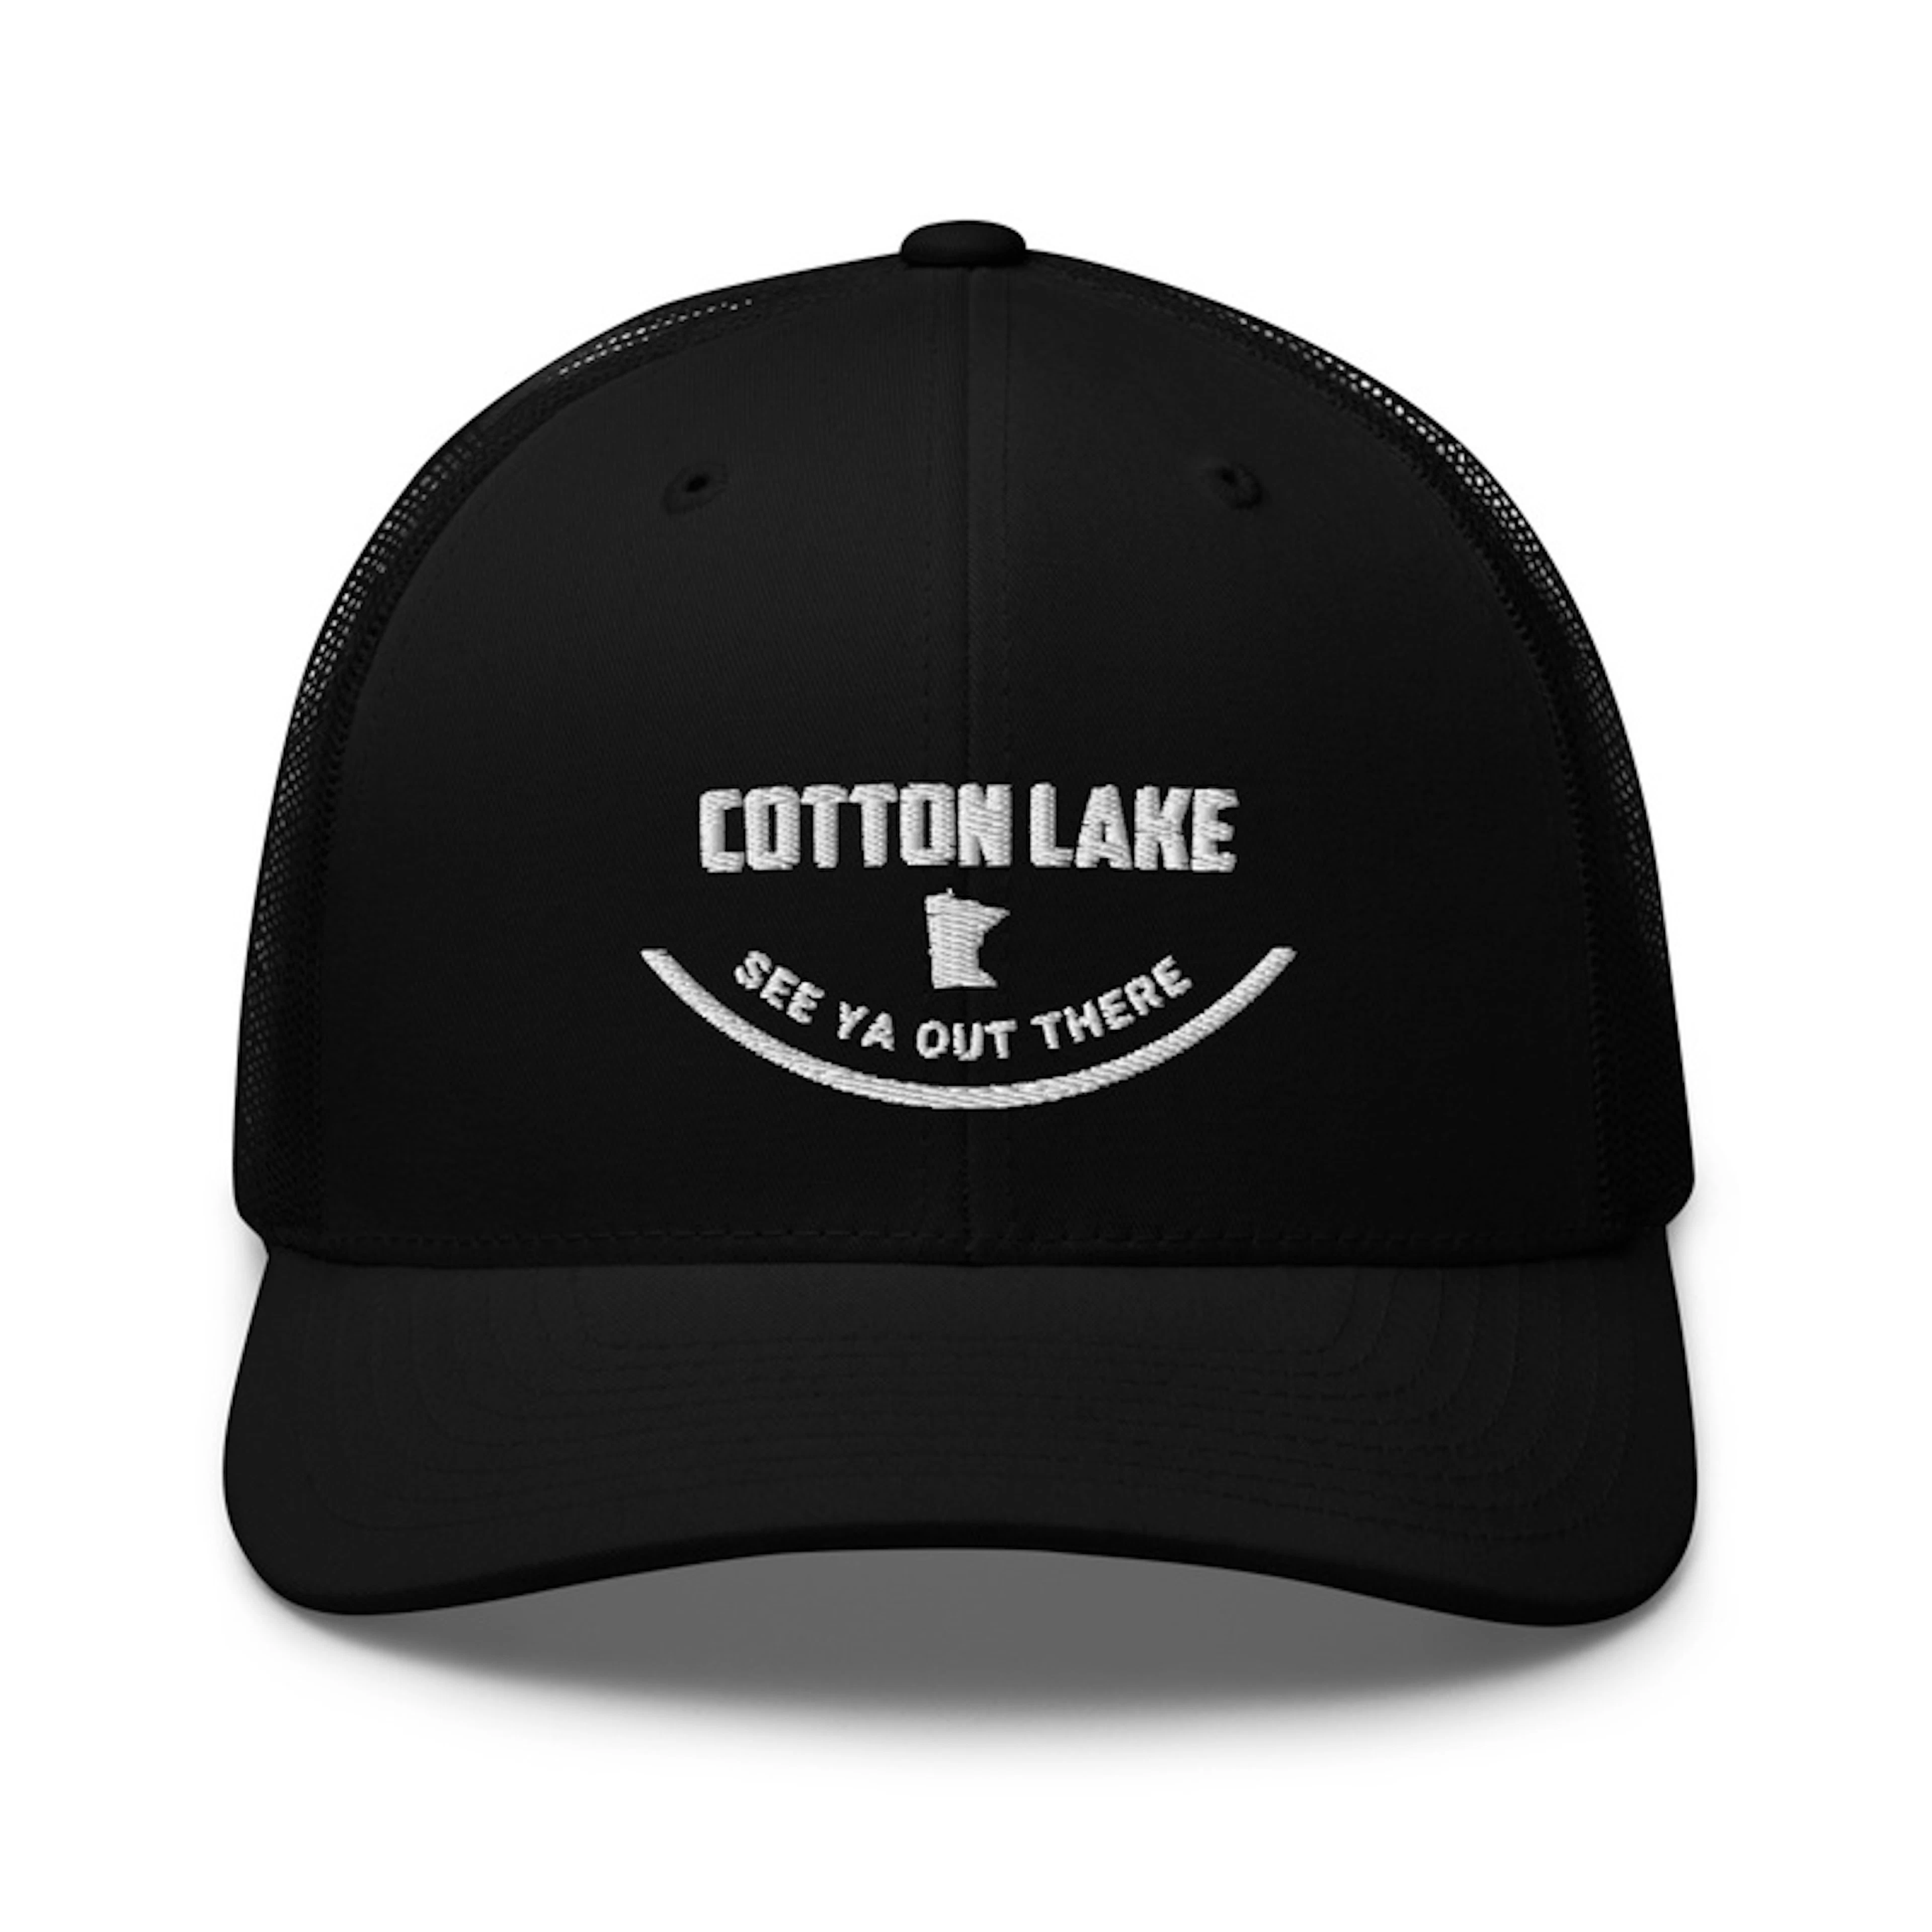 Black Trucker hat with White letters